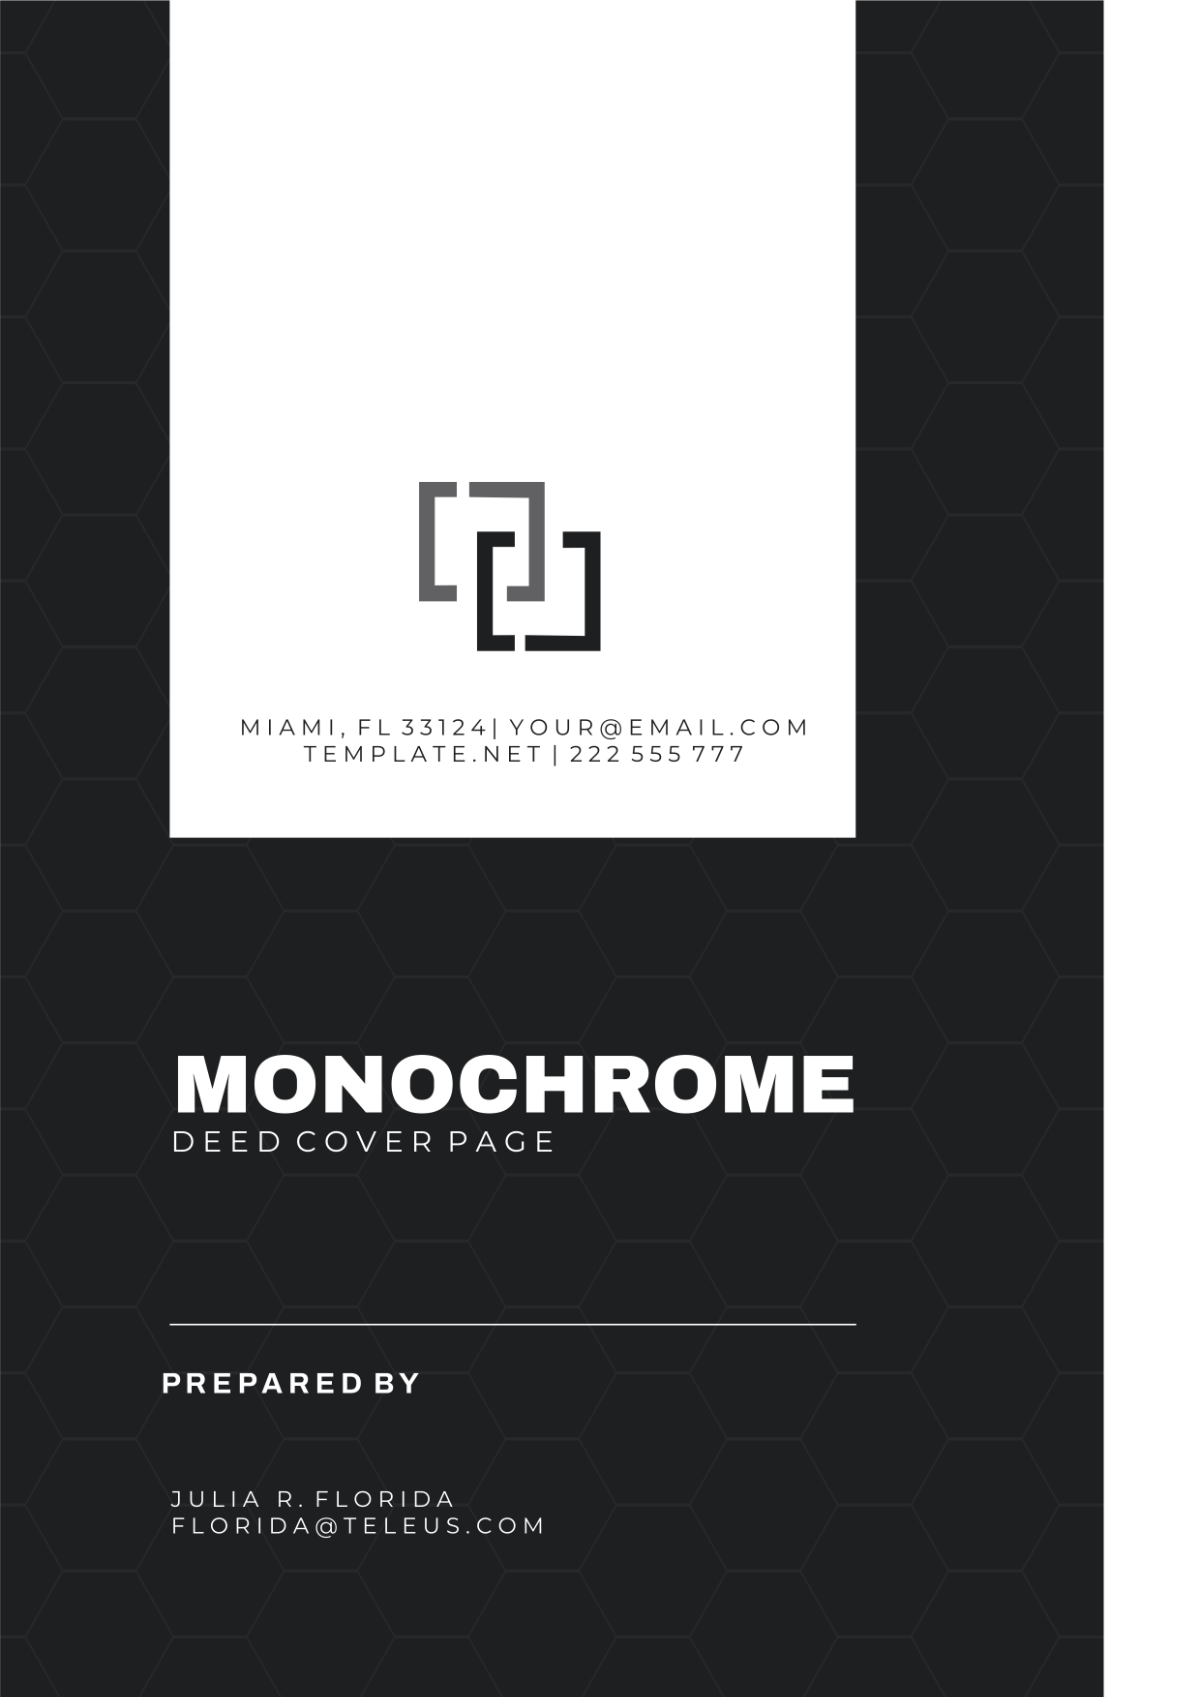 Monochrome Deed Cover Page